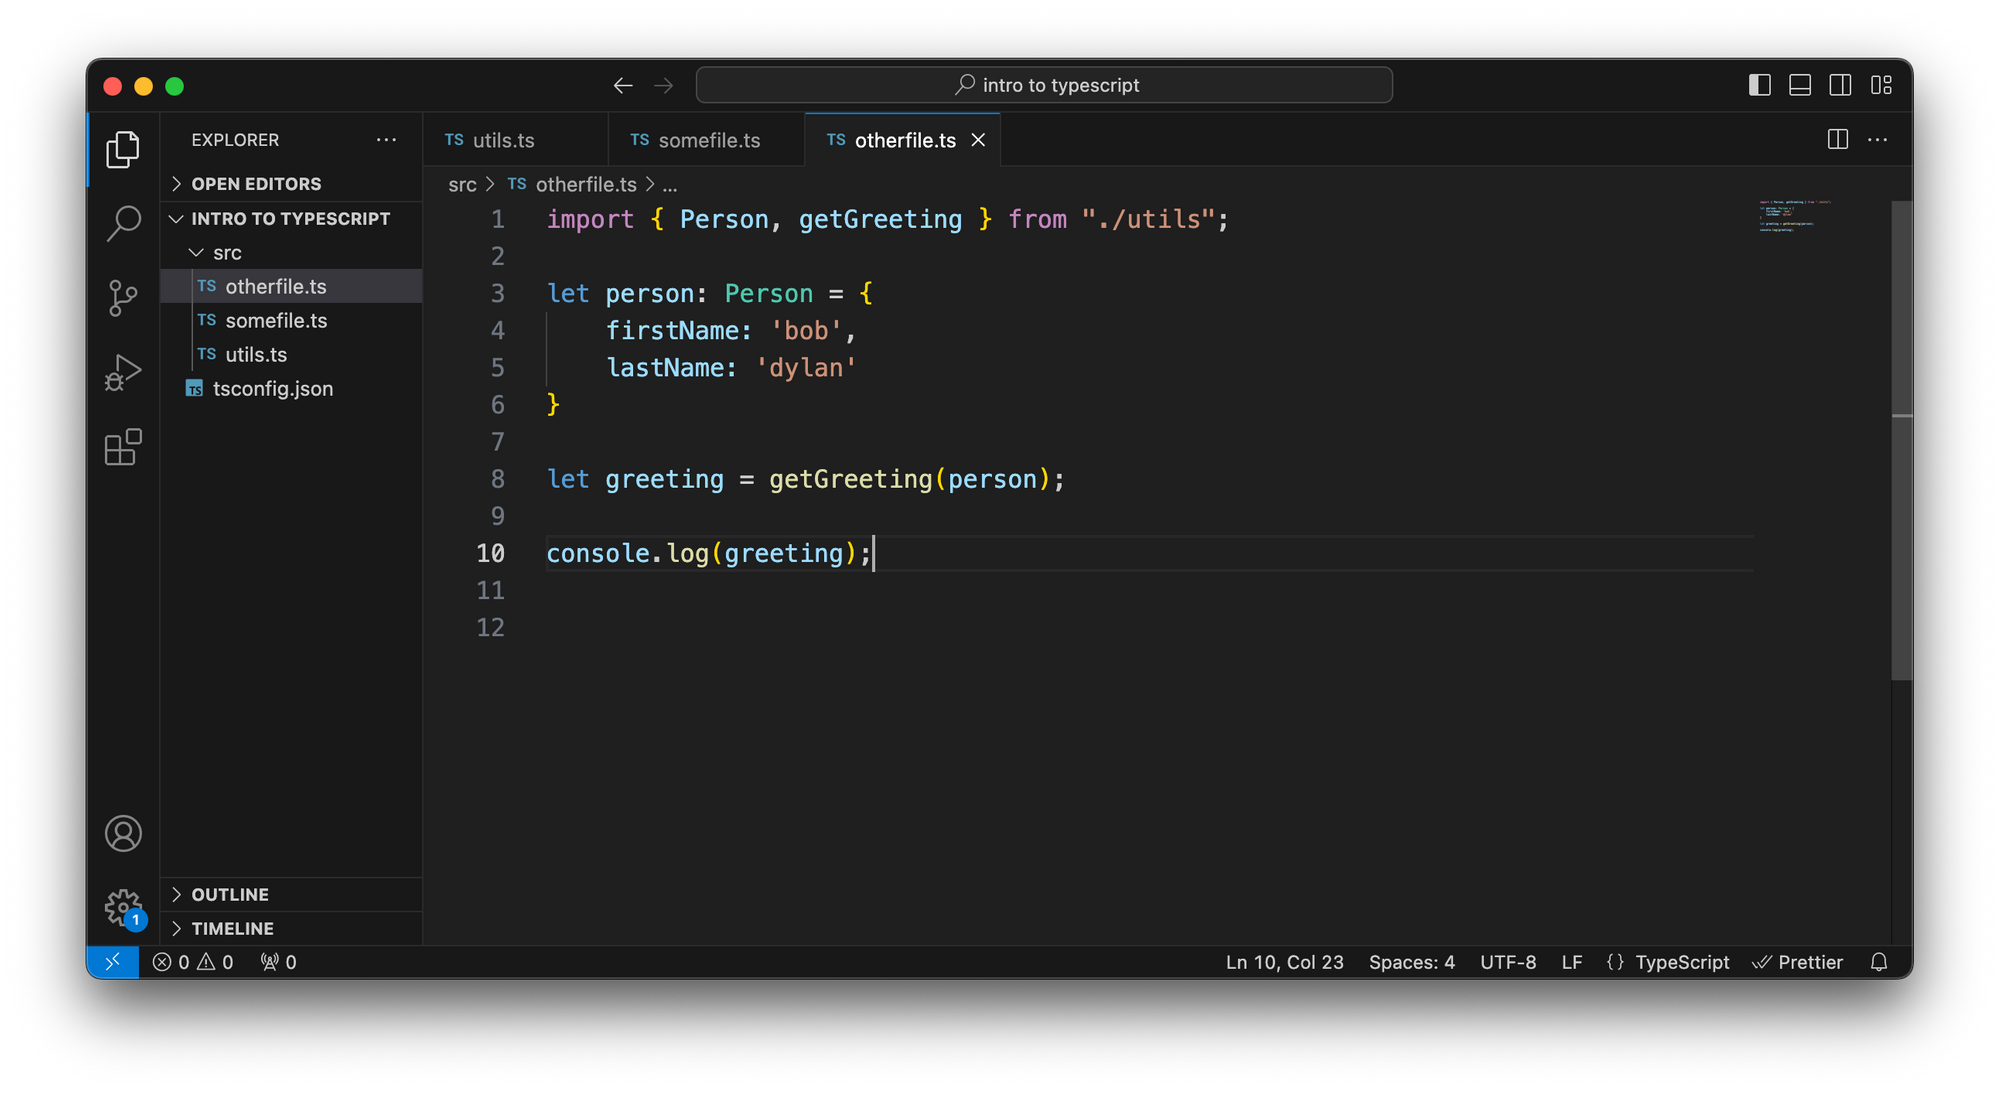 VS Code with yet another TypeScript file calling our previously defined function. This time we don't inline the function argument, but create a new variable for it. When setting the type of this argument, we reuse the previously defined 'Person' type.